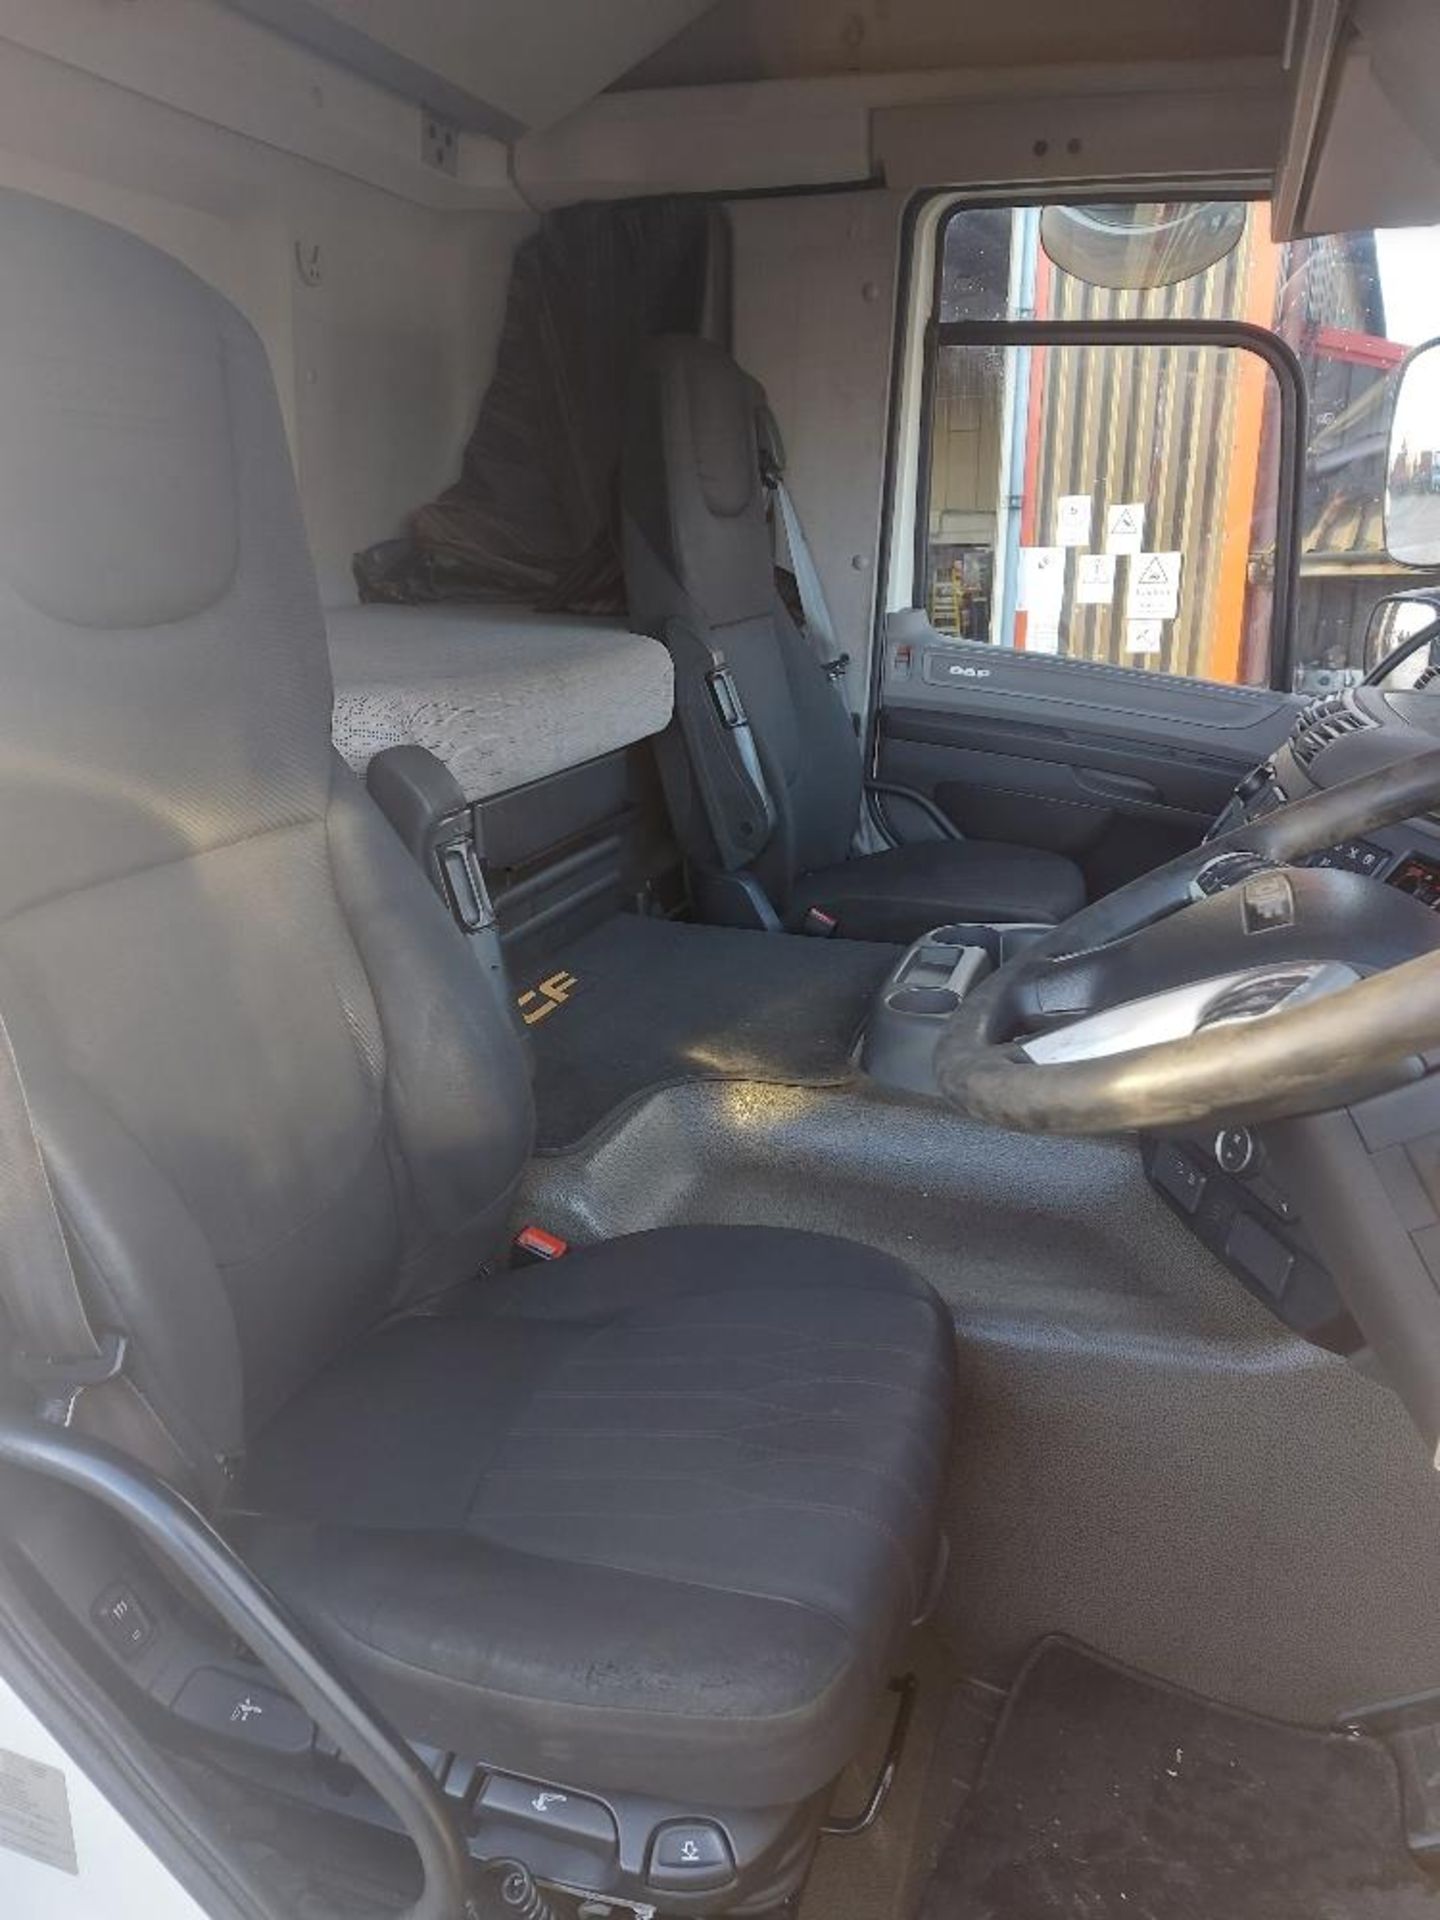 DAF CF 480 FTG Space Cab 6x2 Tractor Unit - Image 7 of 11